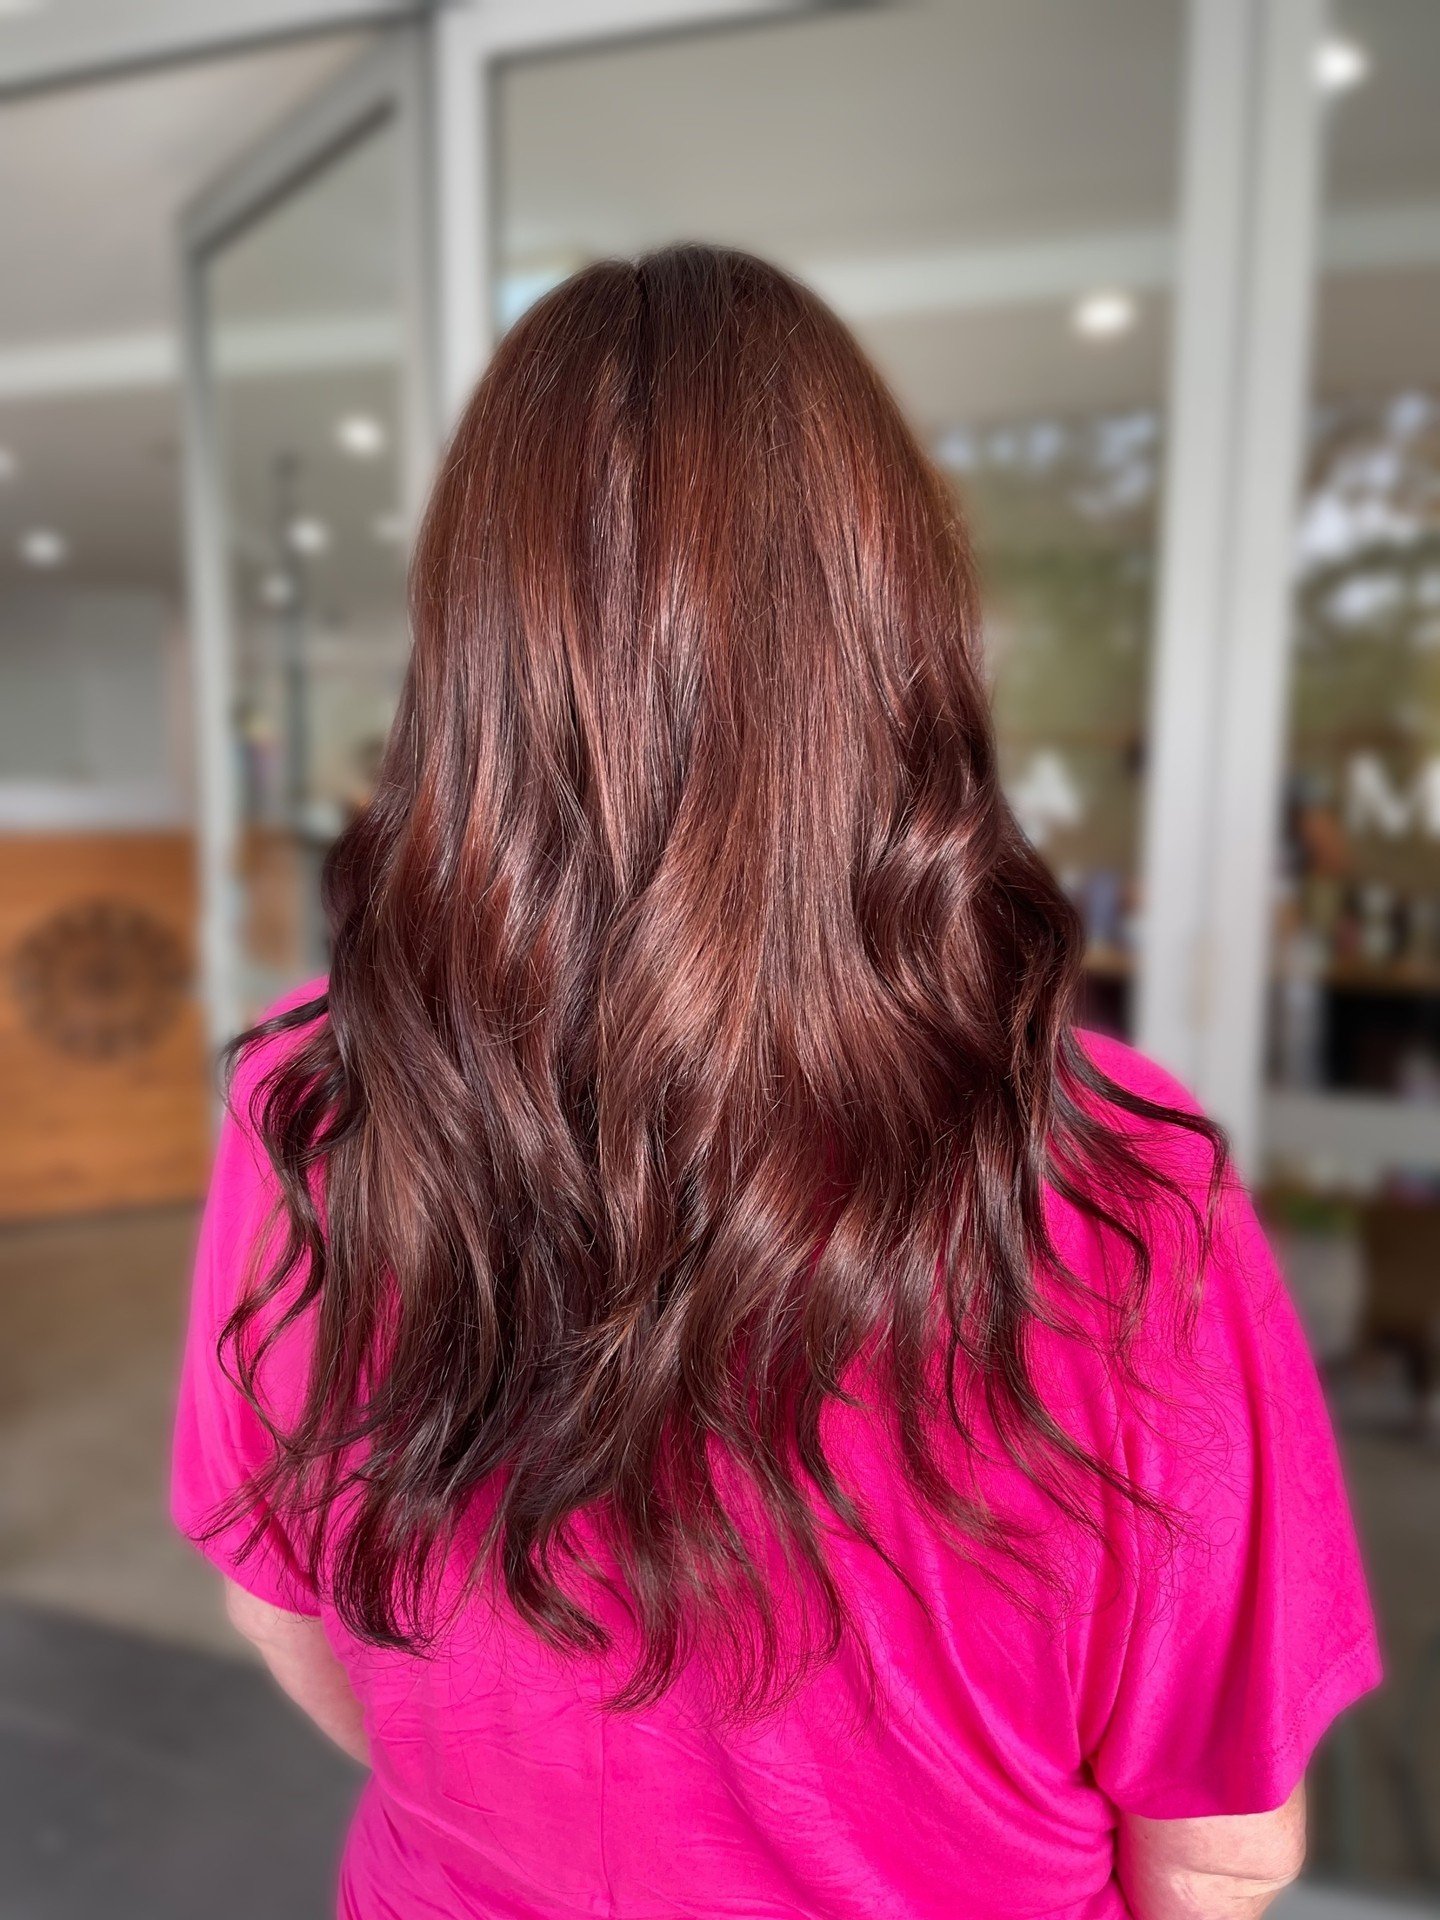 We recently had a client come to us with years of black hair dye, wanting to switch things up and go for a lighter, warmer brown. Naturally, we were thrilled to take on the challenge of a colour correction!

To achieve the desired shade, we first nee